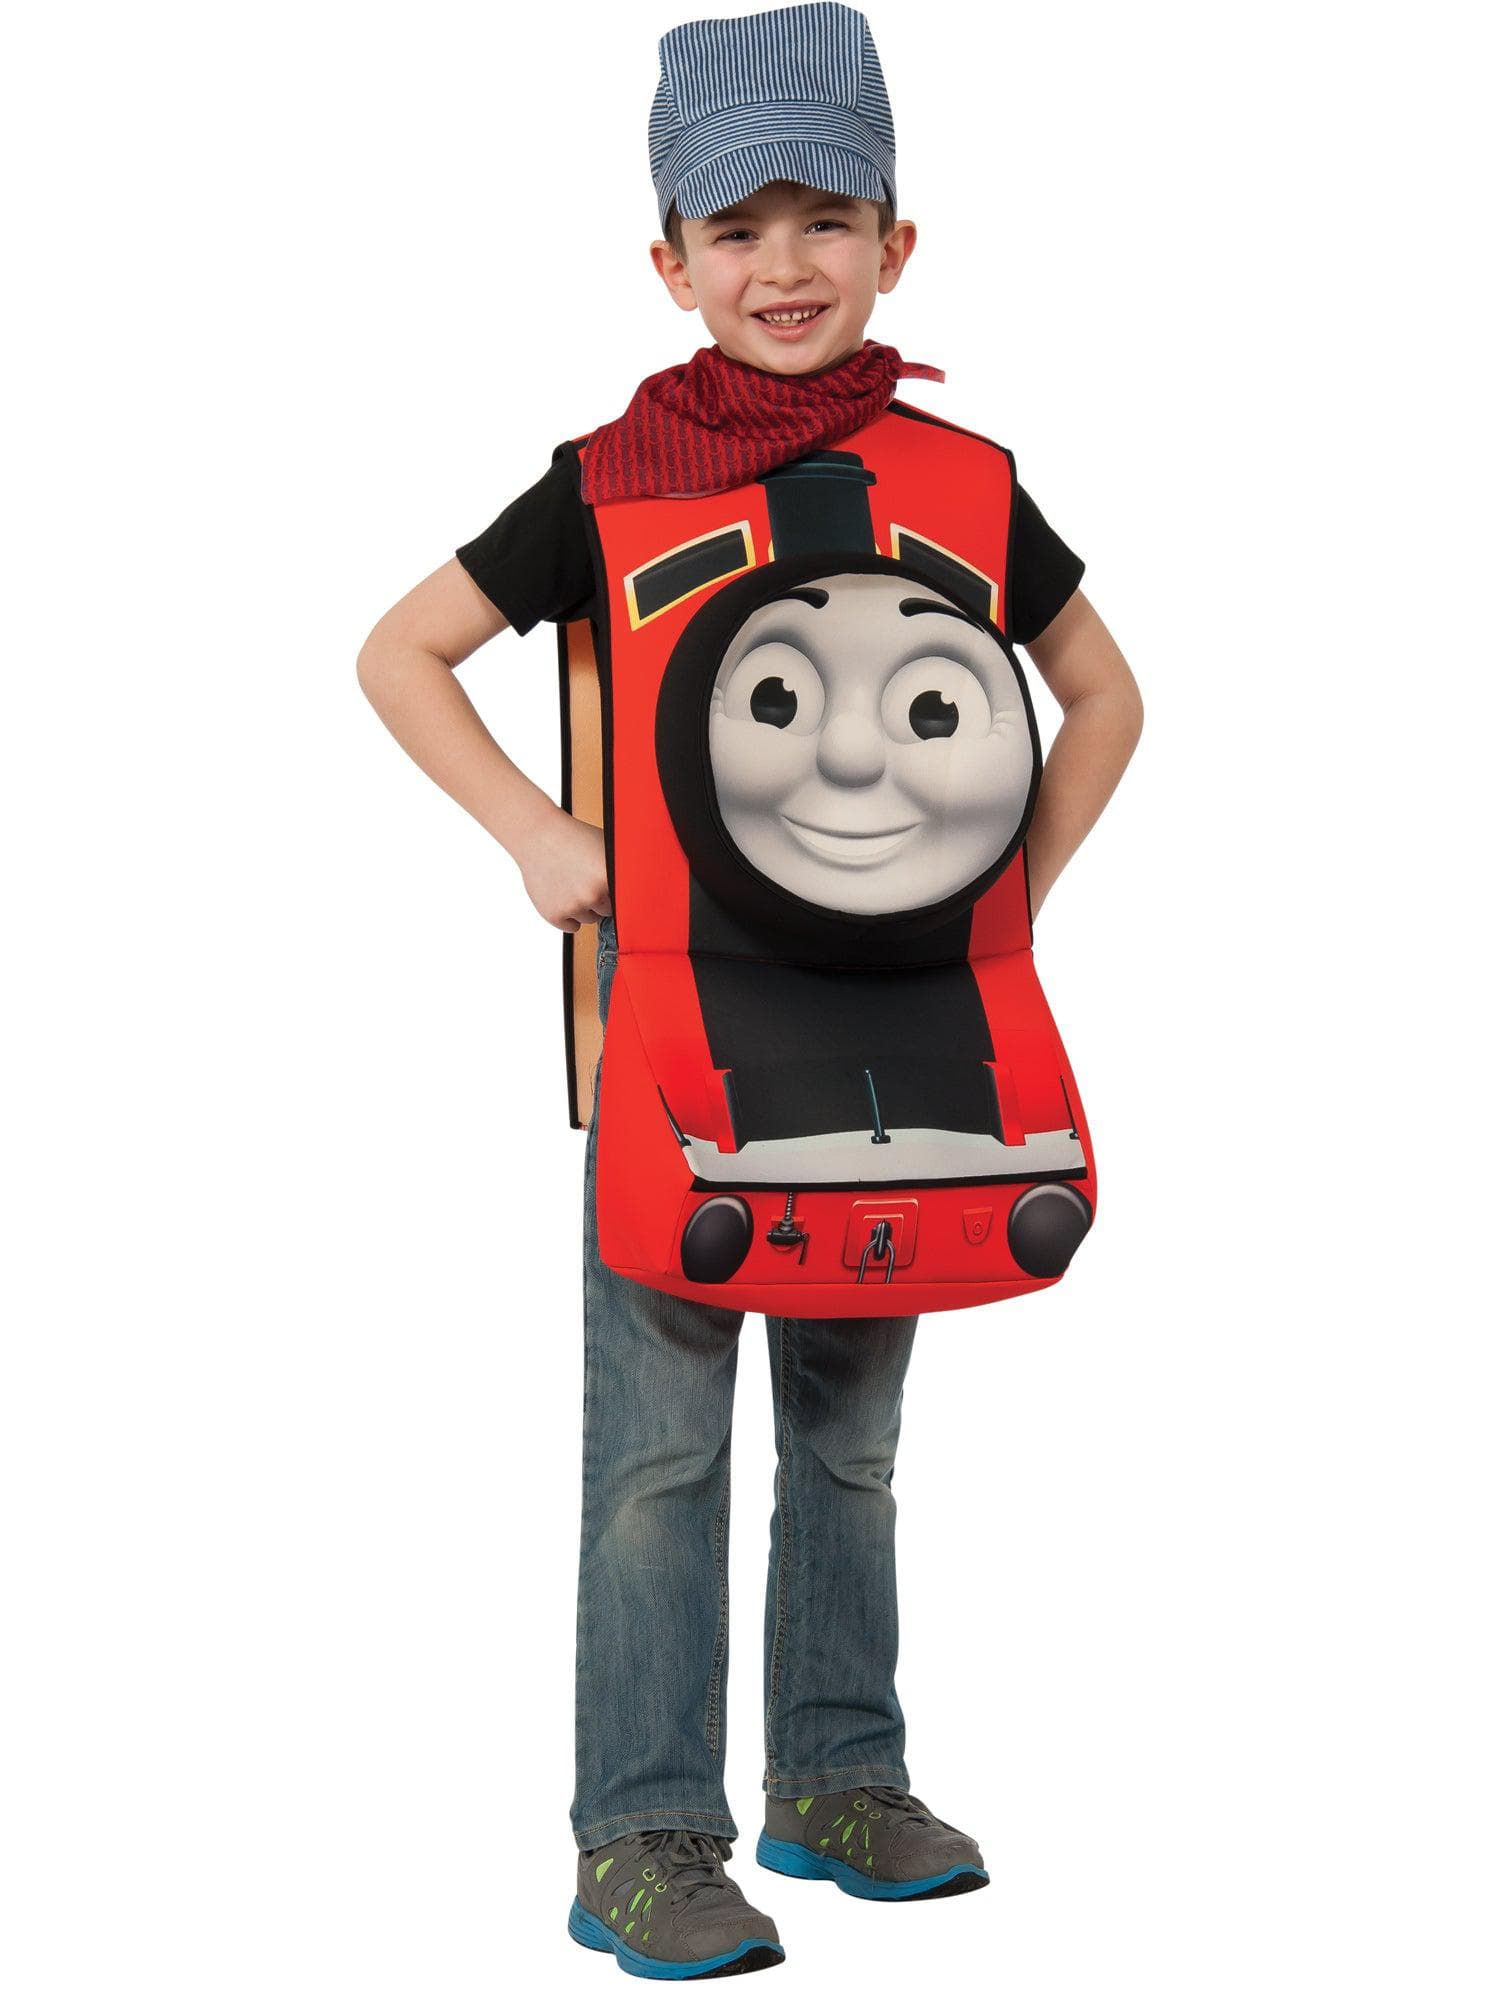 Thomas The Tank James Costume for Toddlers - Deluxe - costumes.com